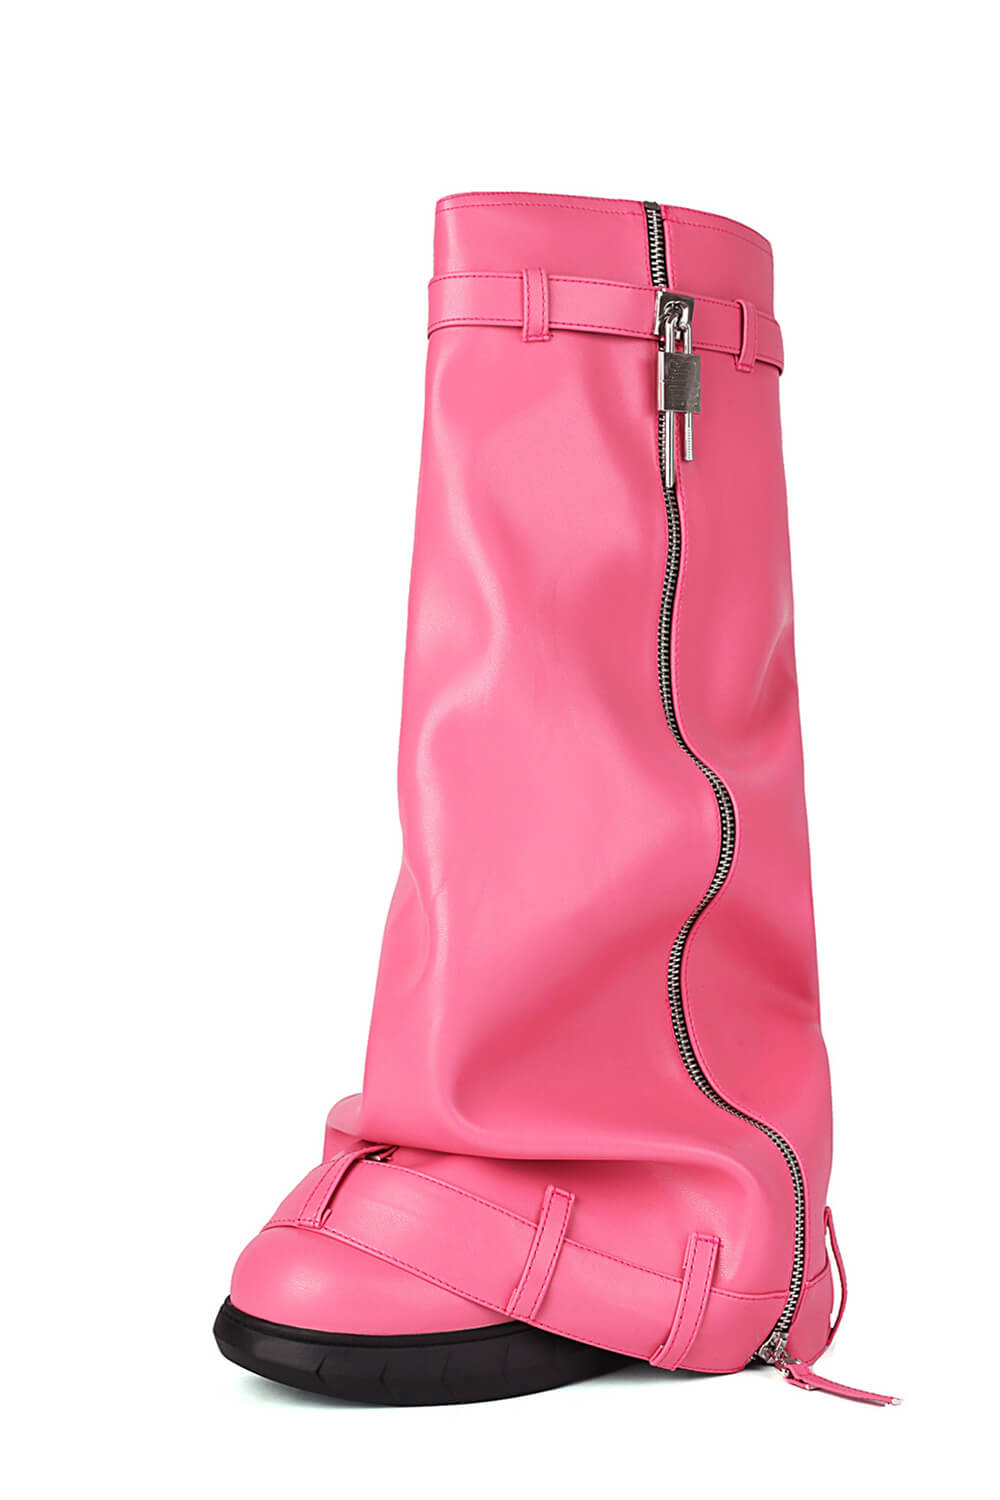 Wrapped Padlock Zip Detail Folded Knee High Wedge Chunky Biker Boots - Pink